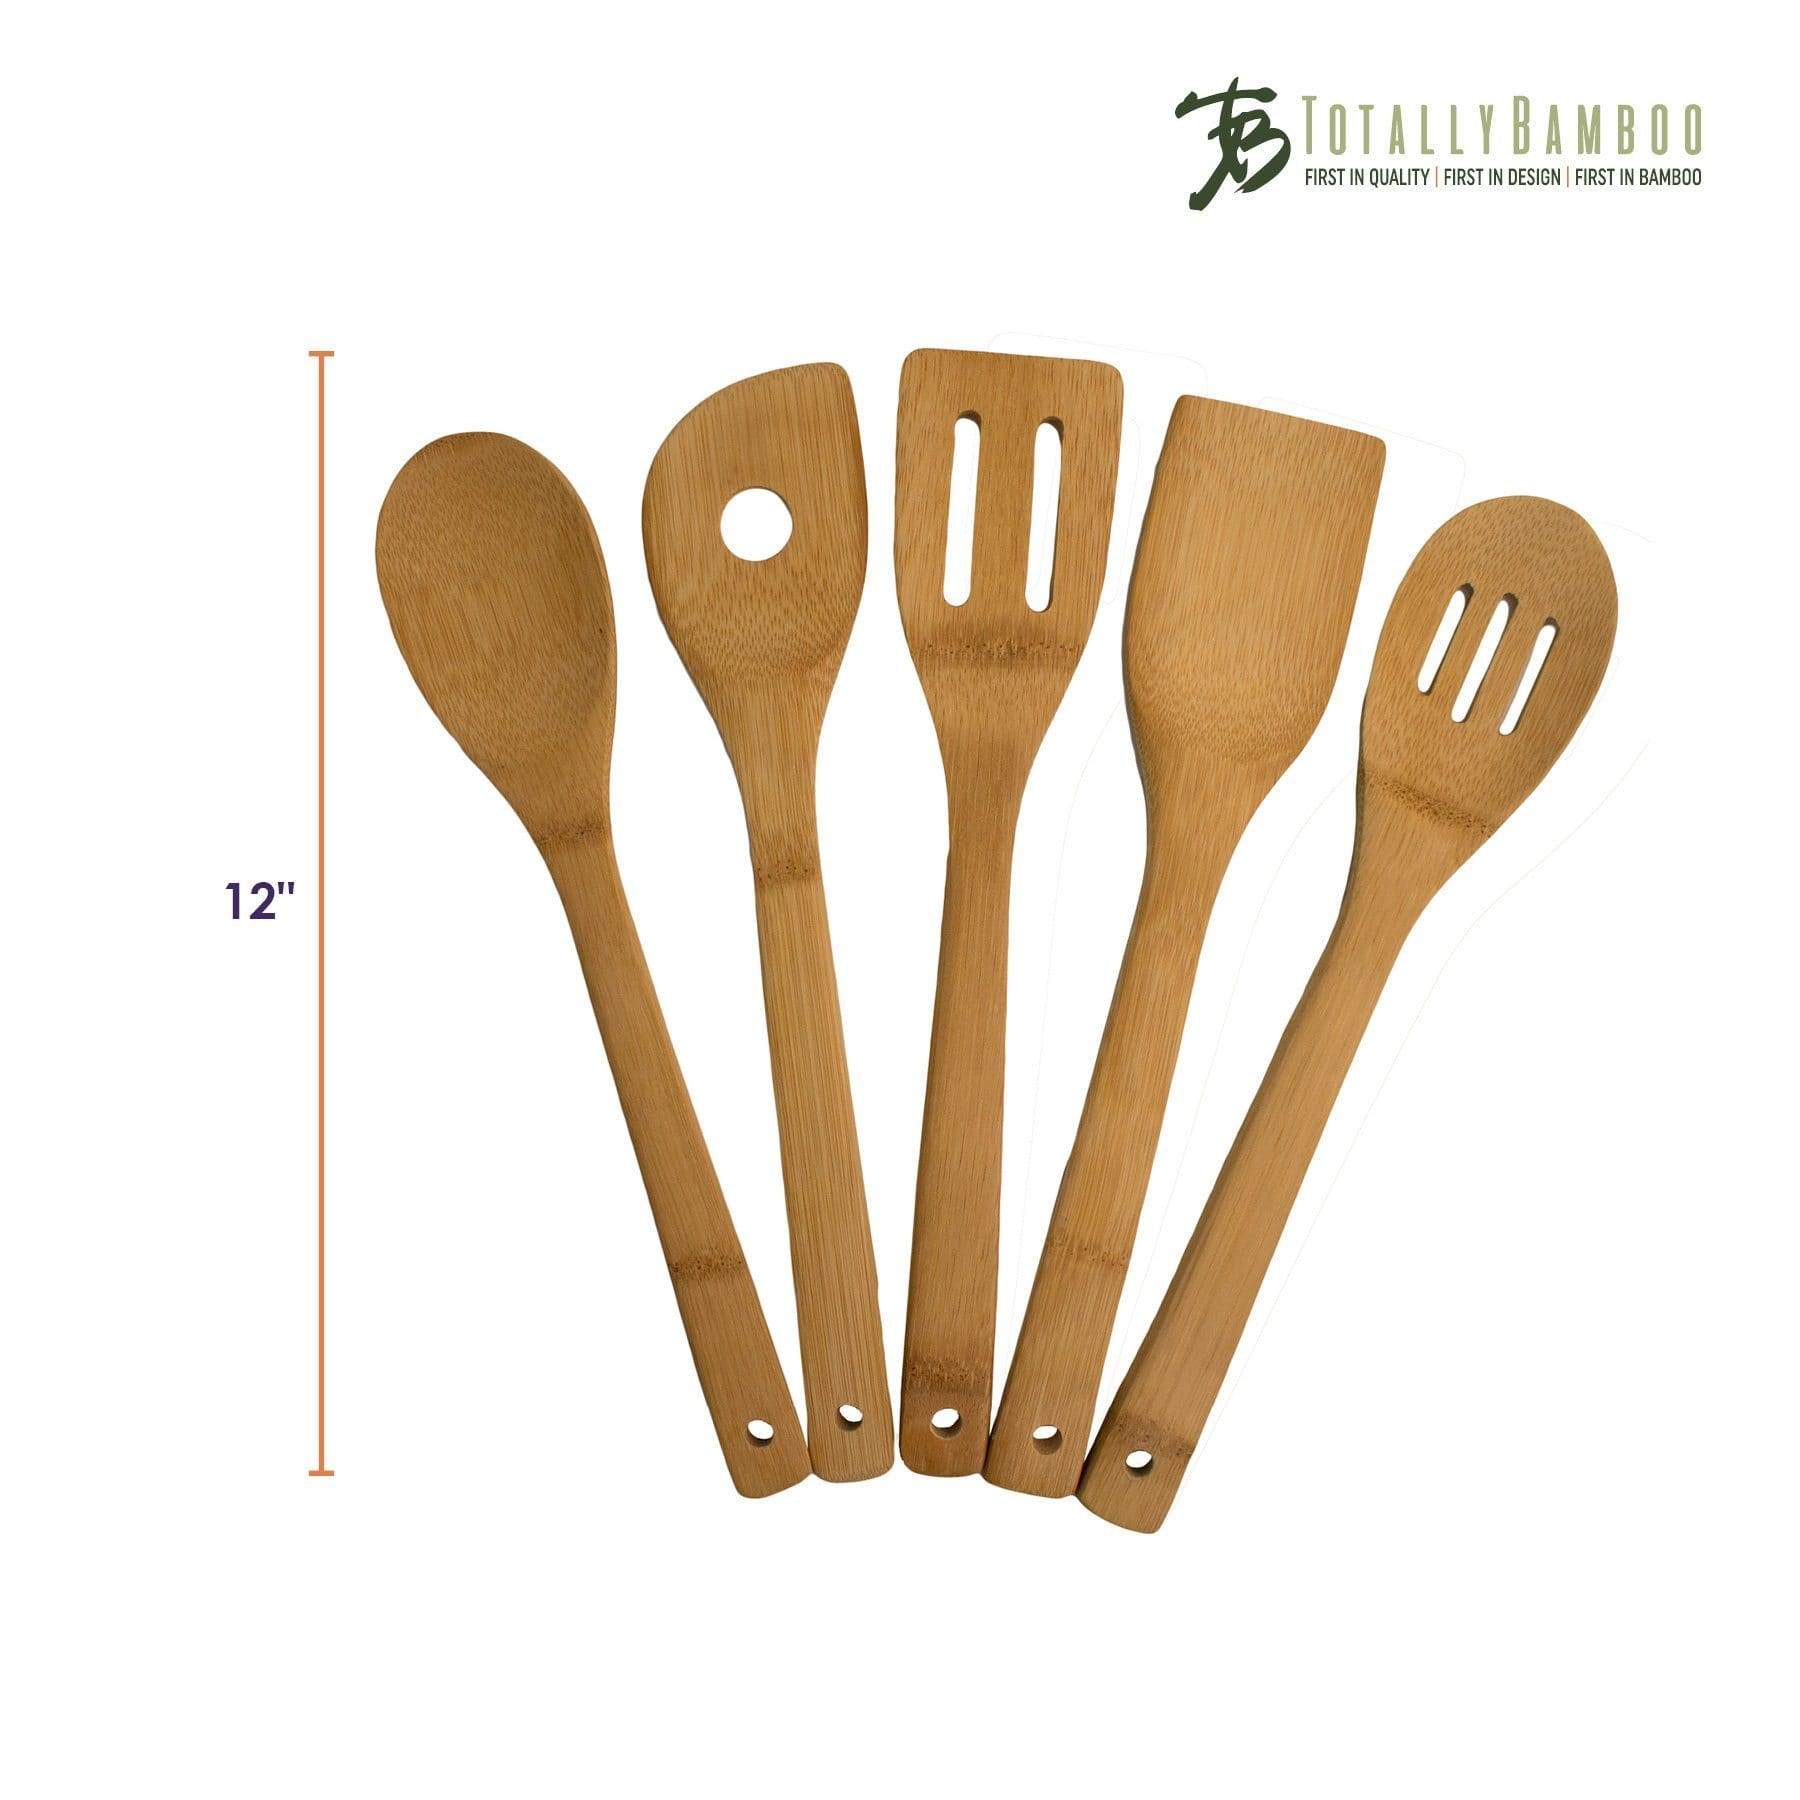 Totally Bamboo 5-Piece Bamboo Cooking Utensil Set